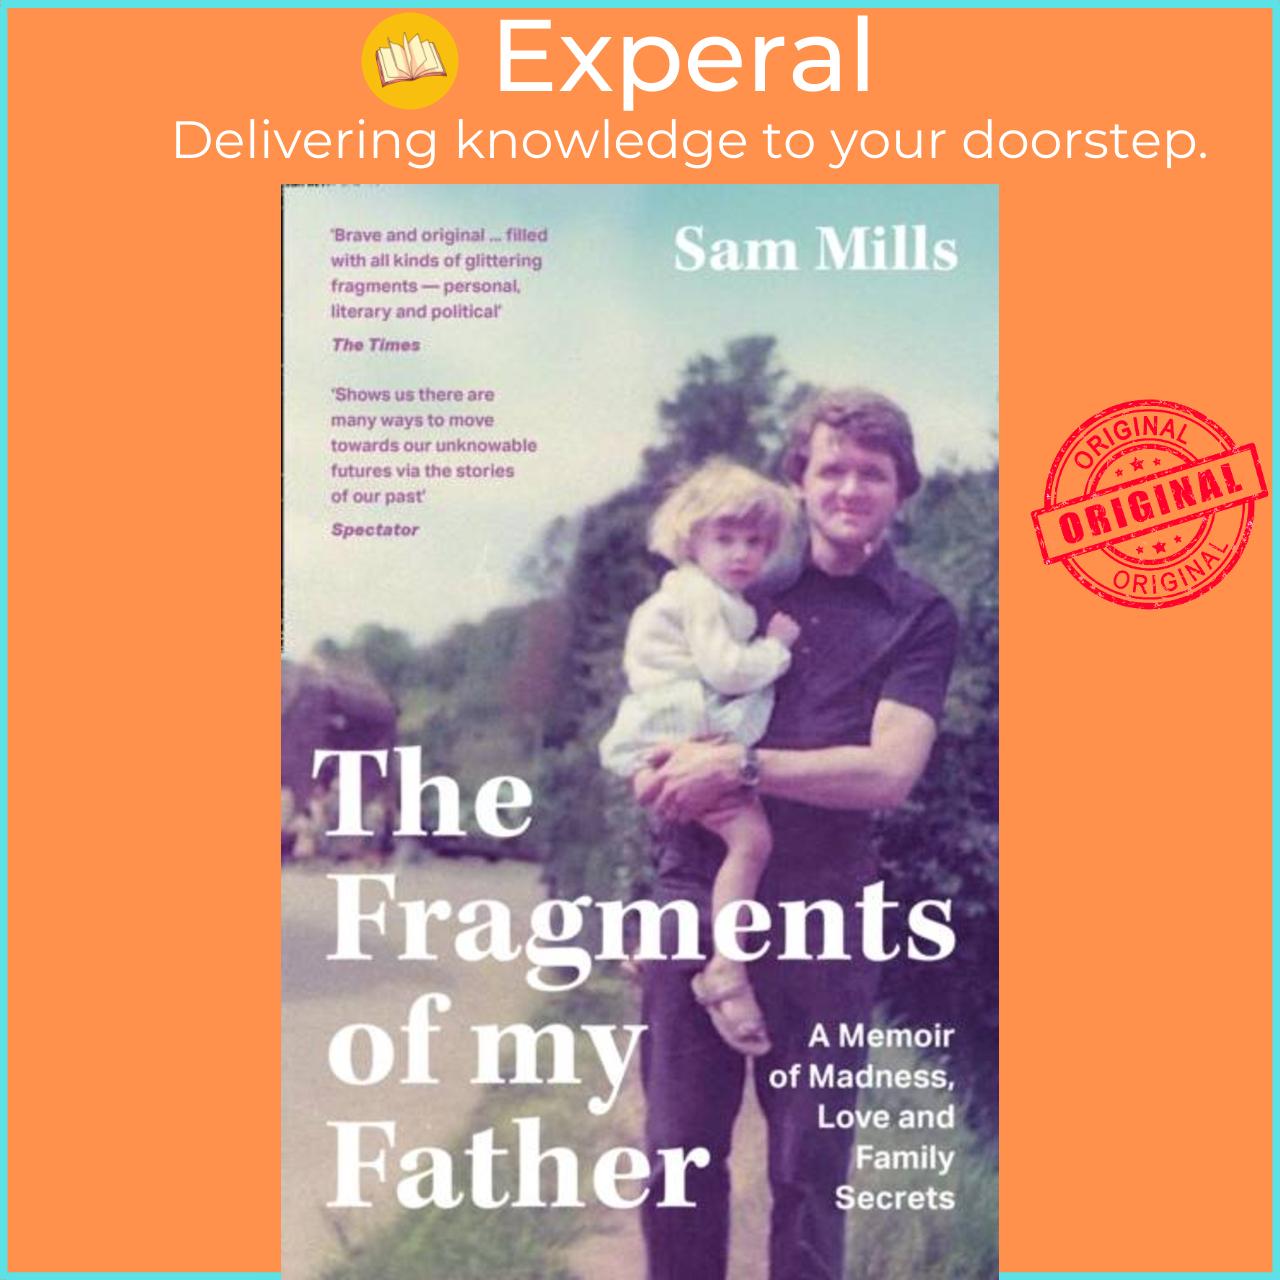 Sách - The Fragments of my Father - A Memoir of Madness, Love and Family Secrets by Sam Mills (UK edition, paperback)